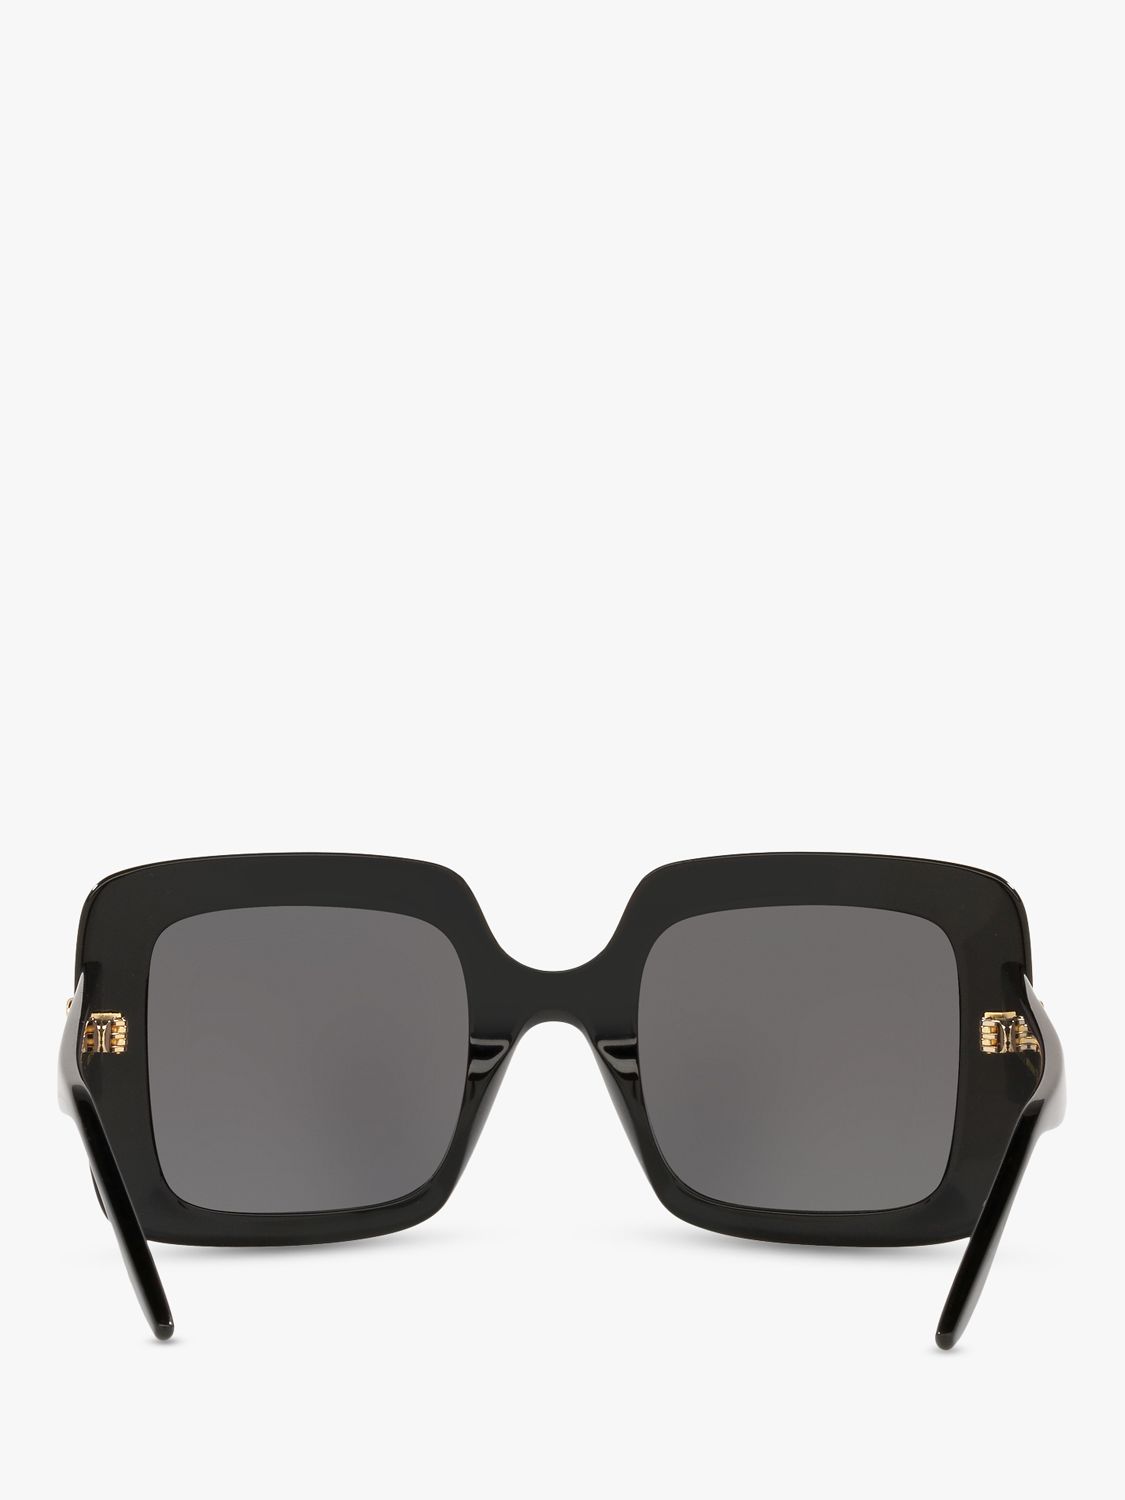 Gucci Gg0896s Women S Square Sunglasses Black Grey At John Lewis And Partners